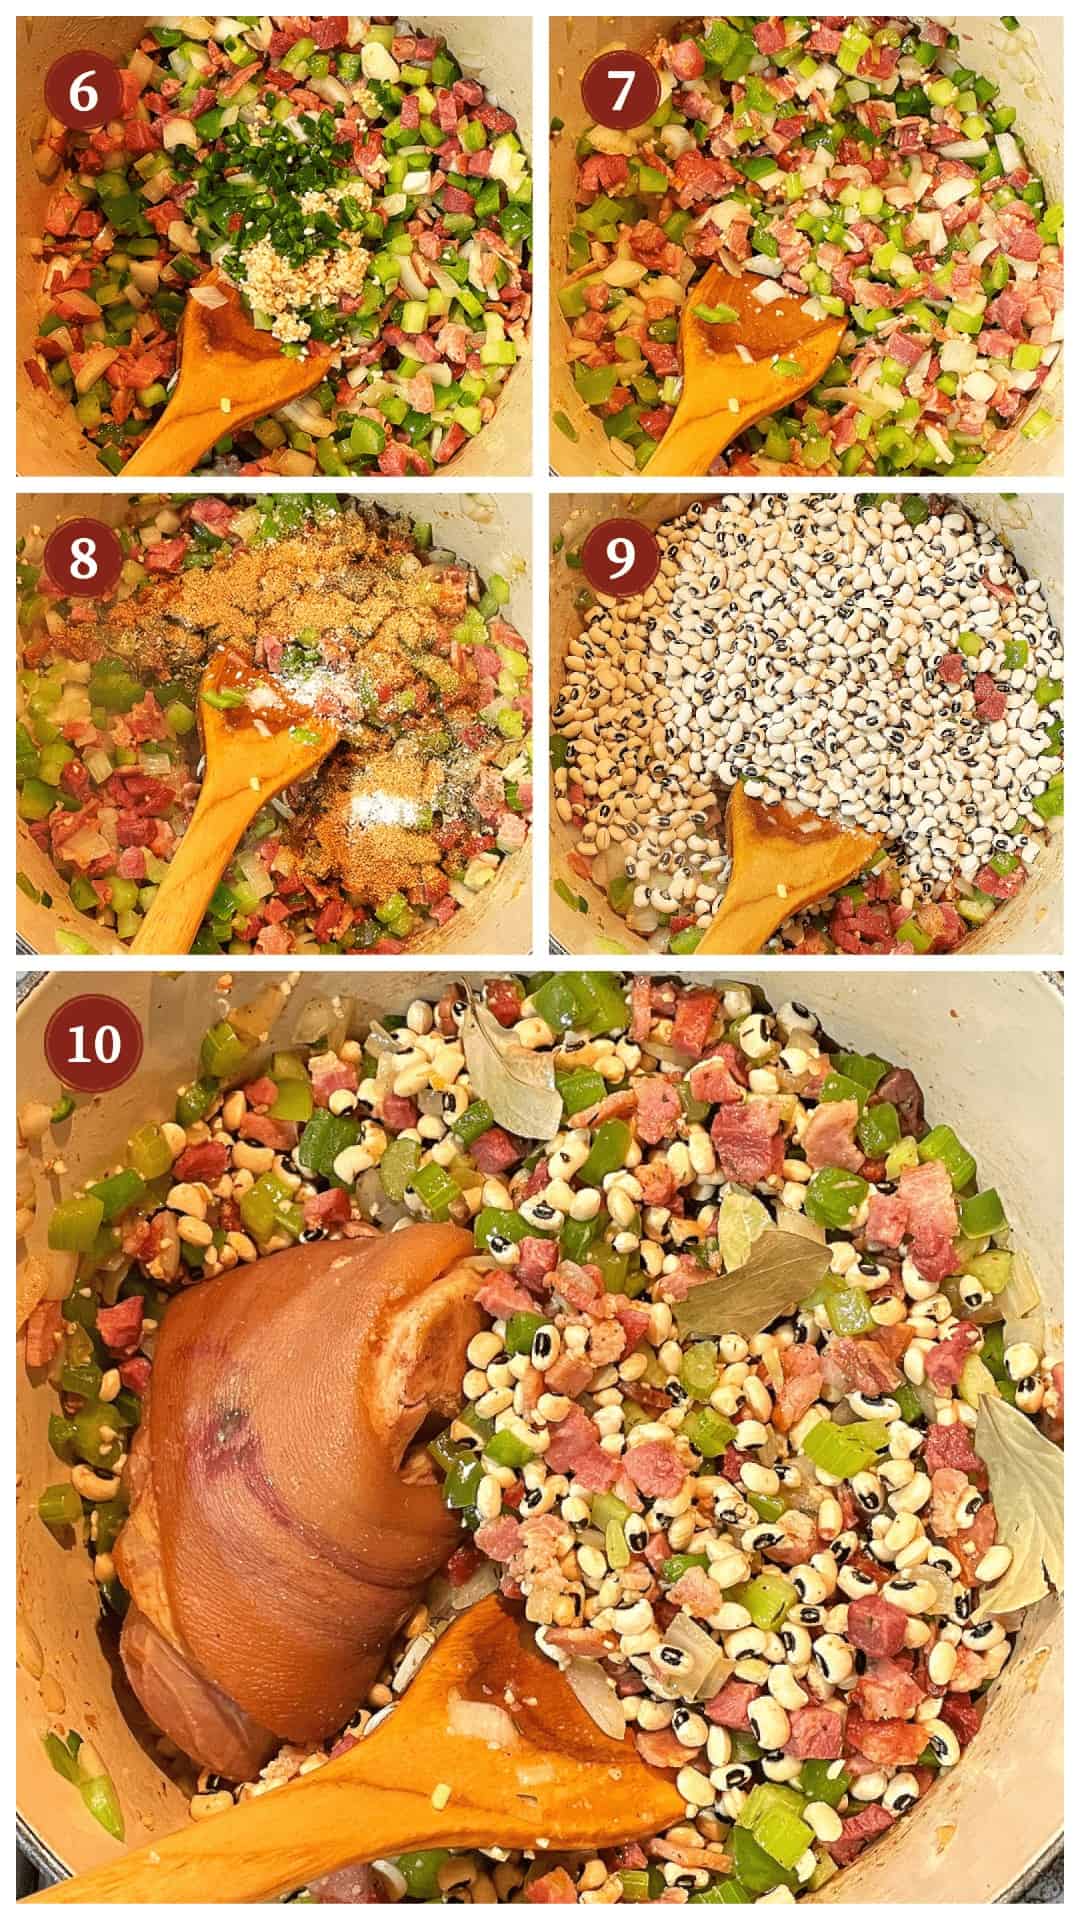 A collage of images showing how to make hoppin john, steps 6 - 10.